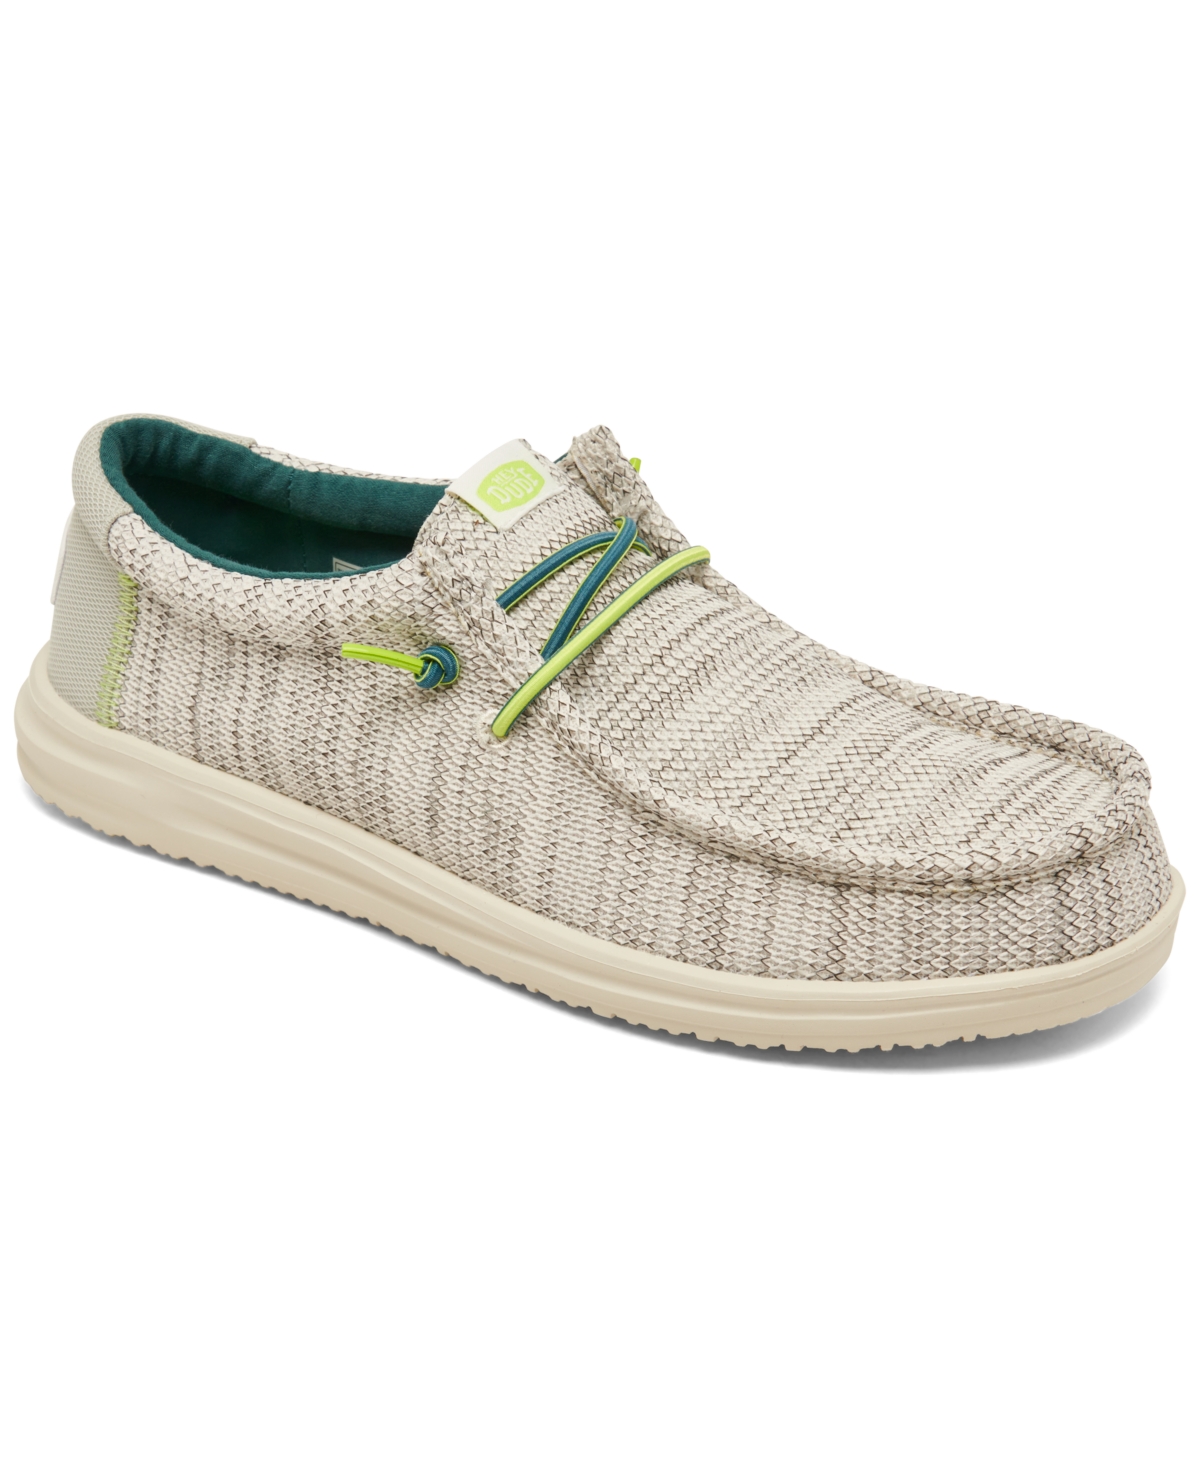 Men's Wally H2O Mesh Slip-on Casual Mocassin Sneakers from Finish Line - WHITE/LIME PUNCH